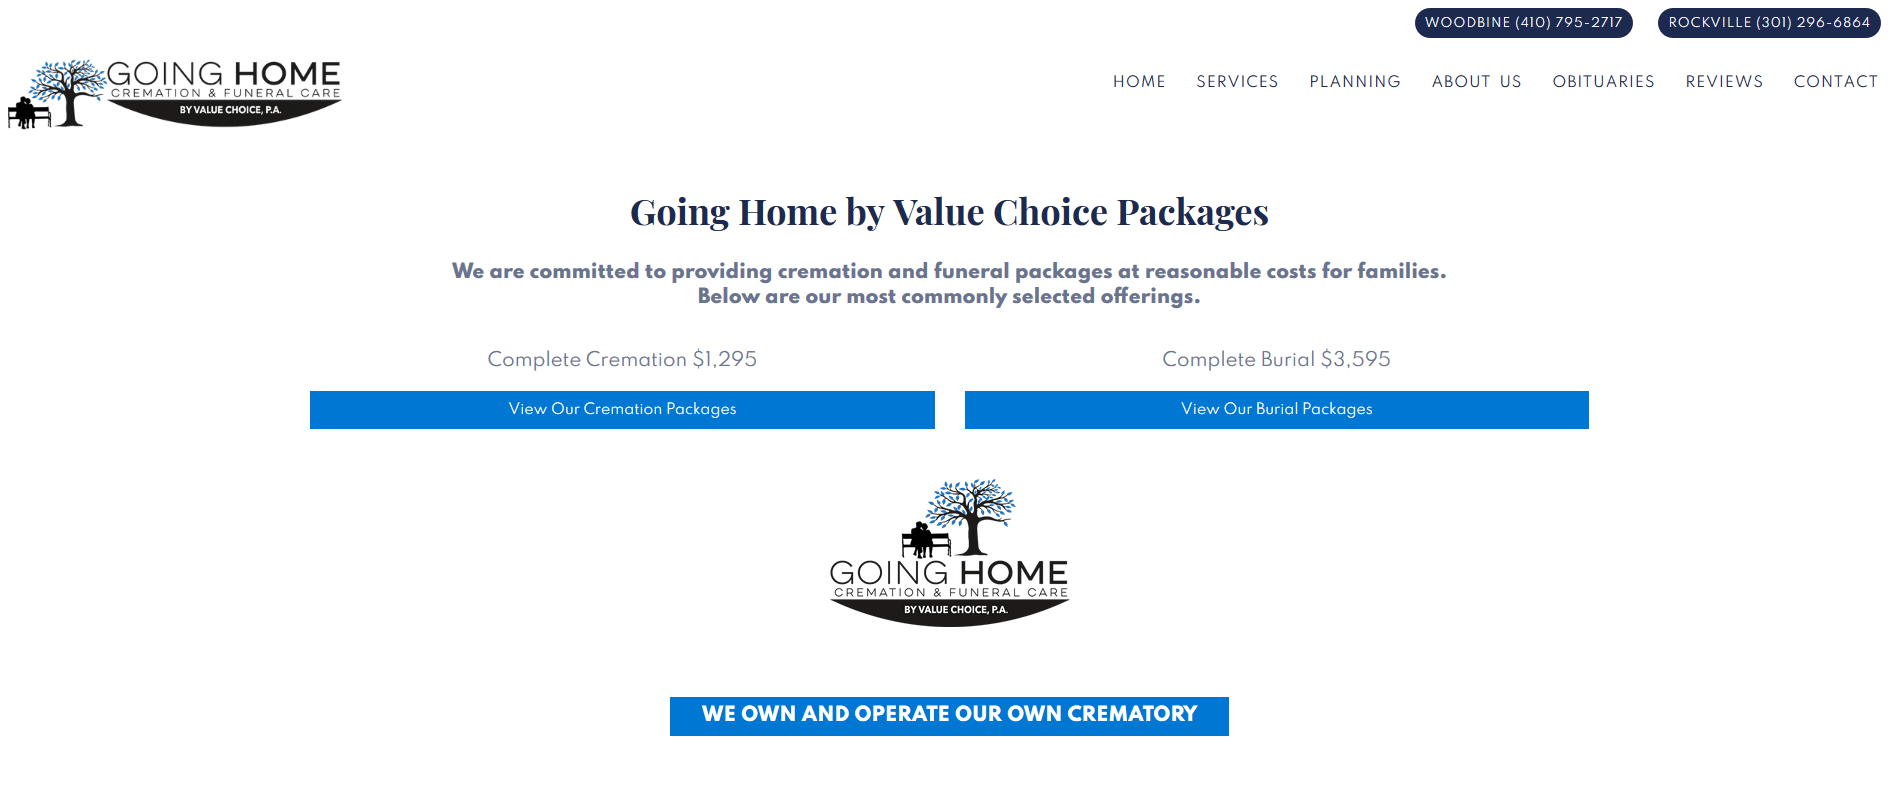 Going Home Cremation & Funeral Care by Value Choice, P.A. SRS Website